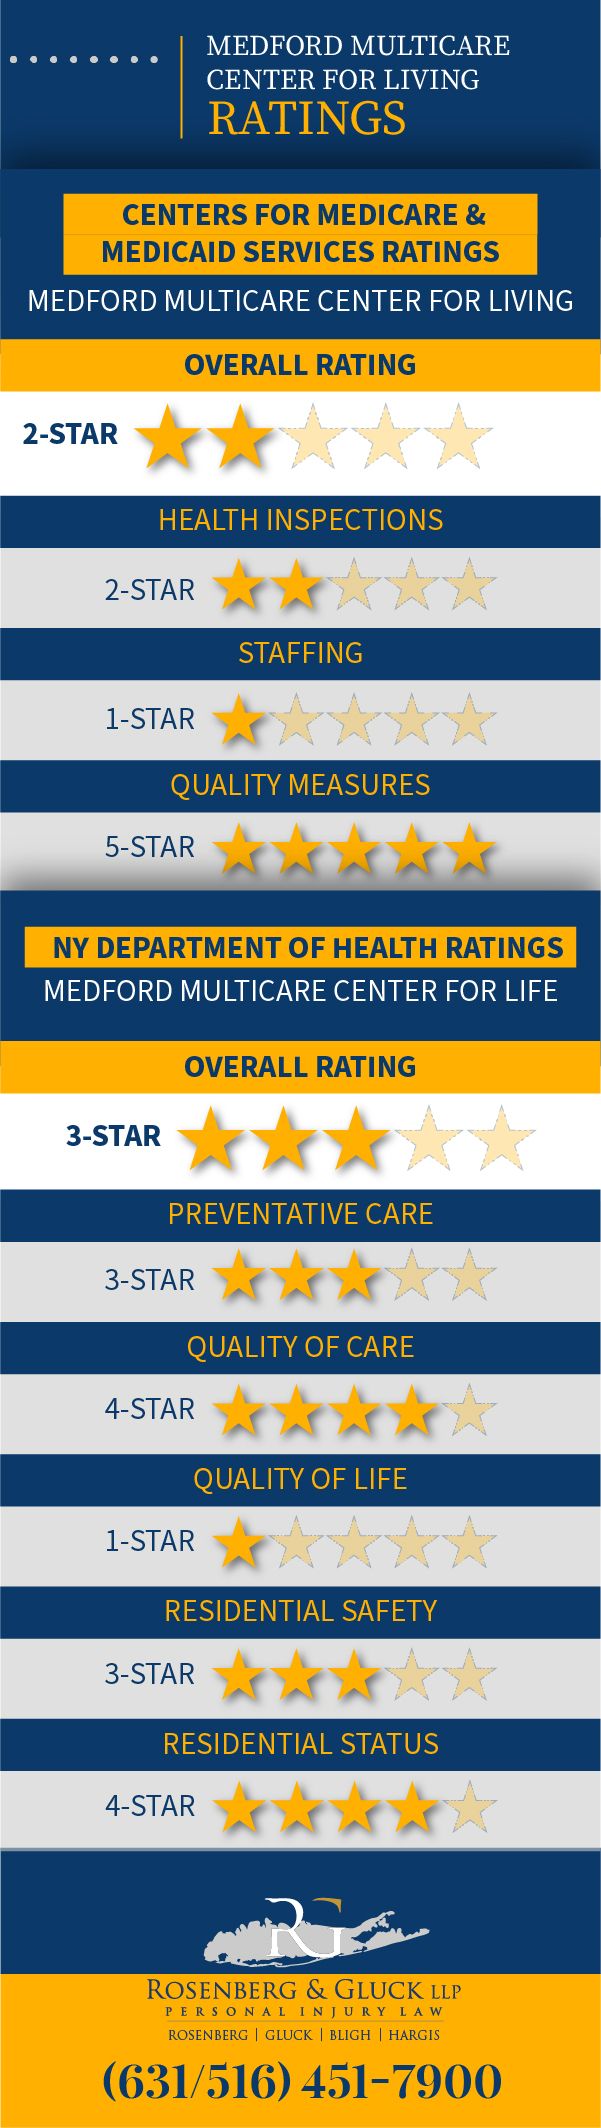 Medford Multicare Center for Living Violations and Ratings